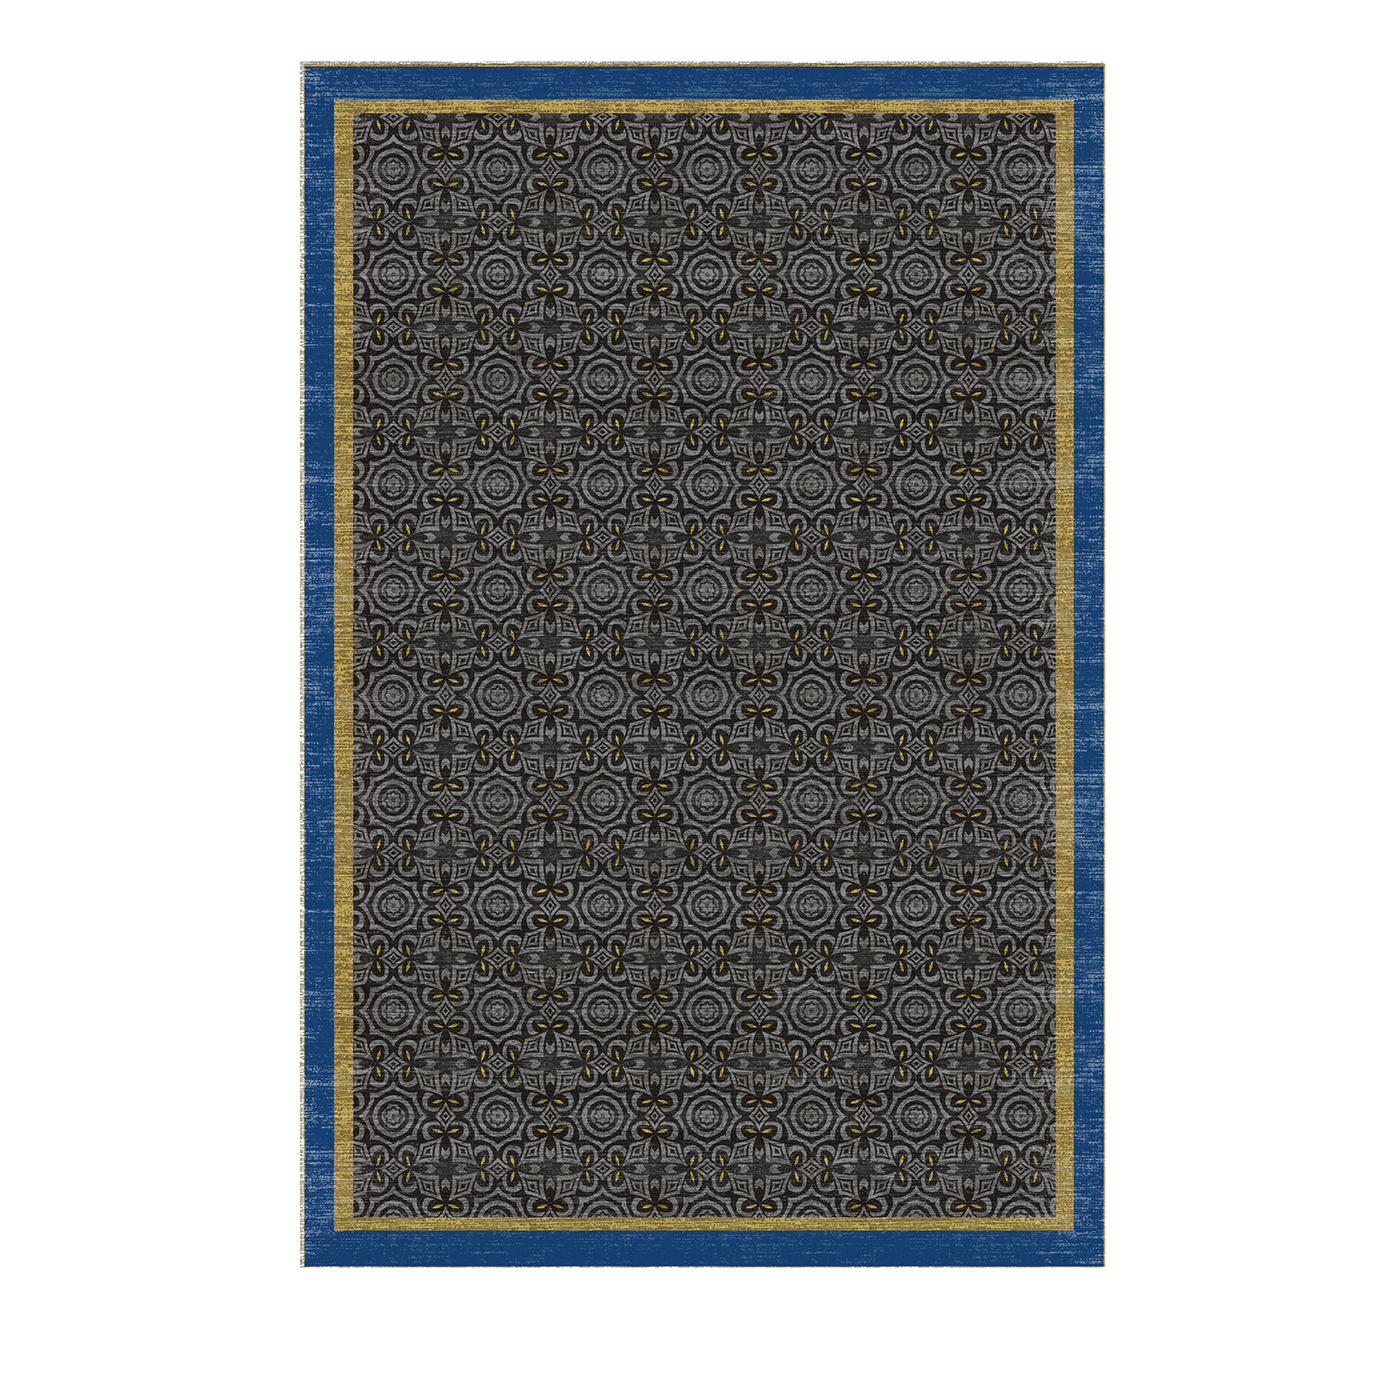 Made of high-quality wool and bamboo fibers, this refined rug effortlessly combines Southeast Asian craftsmanship with Italian artistic sensibility. The intricate geometric design is masterfully rendered in rich pale blue on a subtle slate